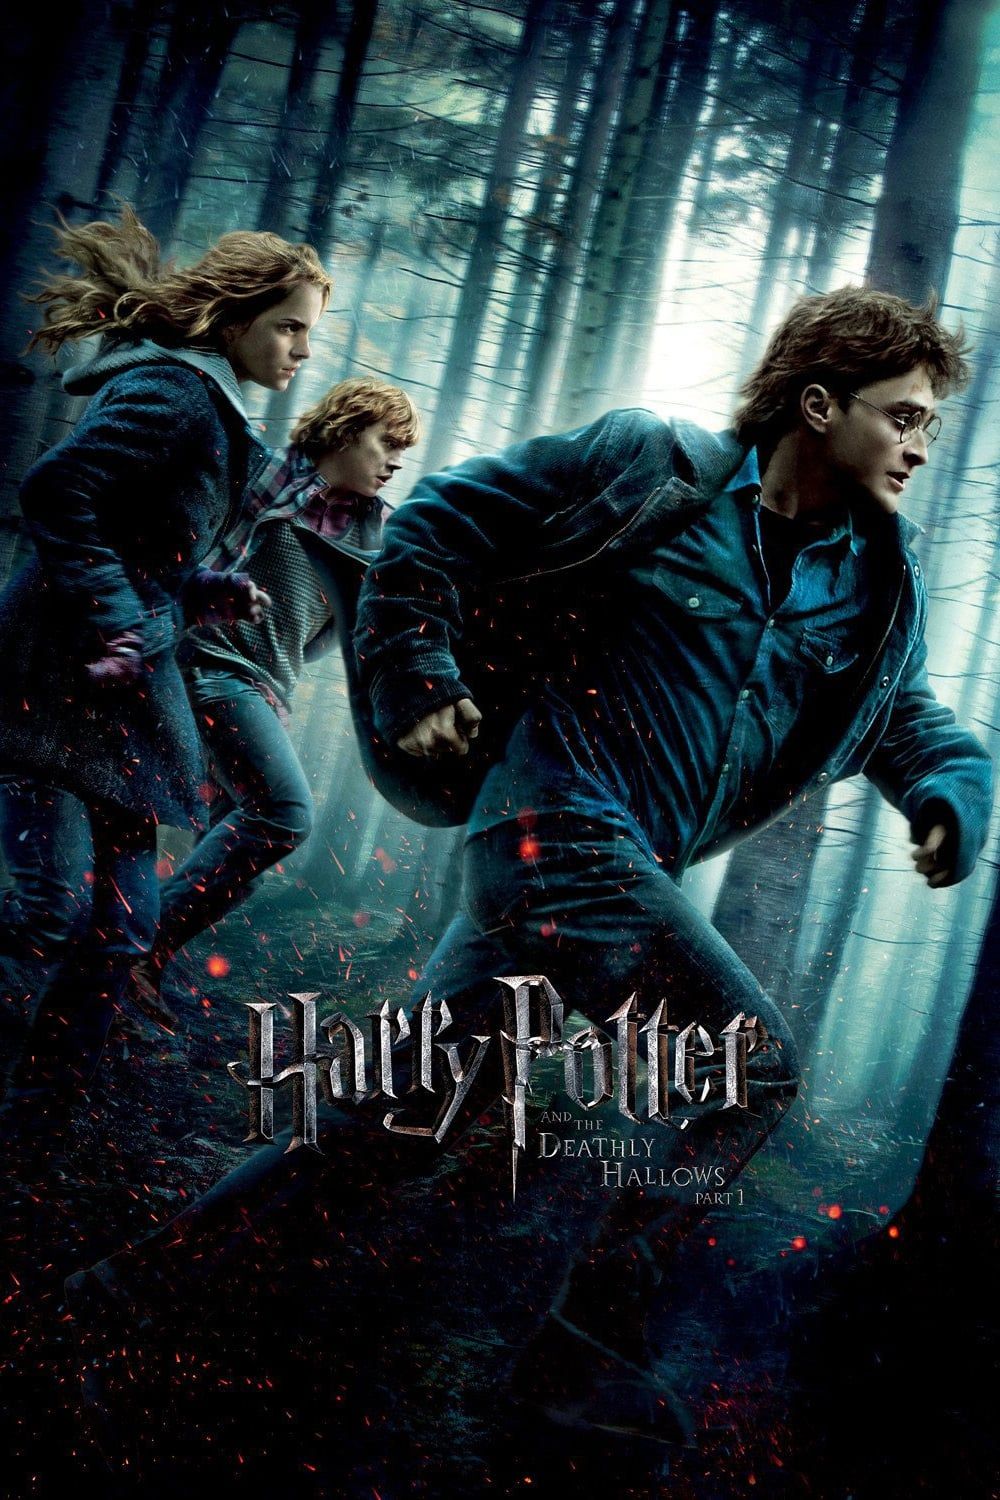 Harry Potter and the Deathly Hallows - Part 1